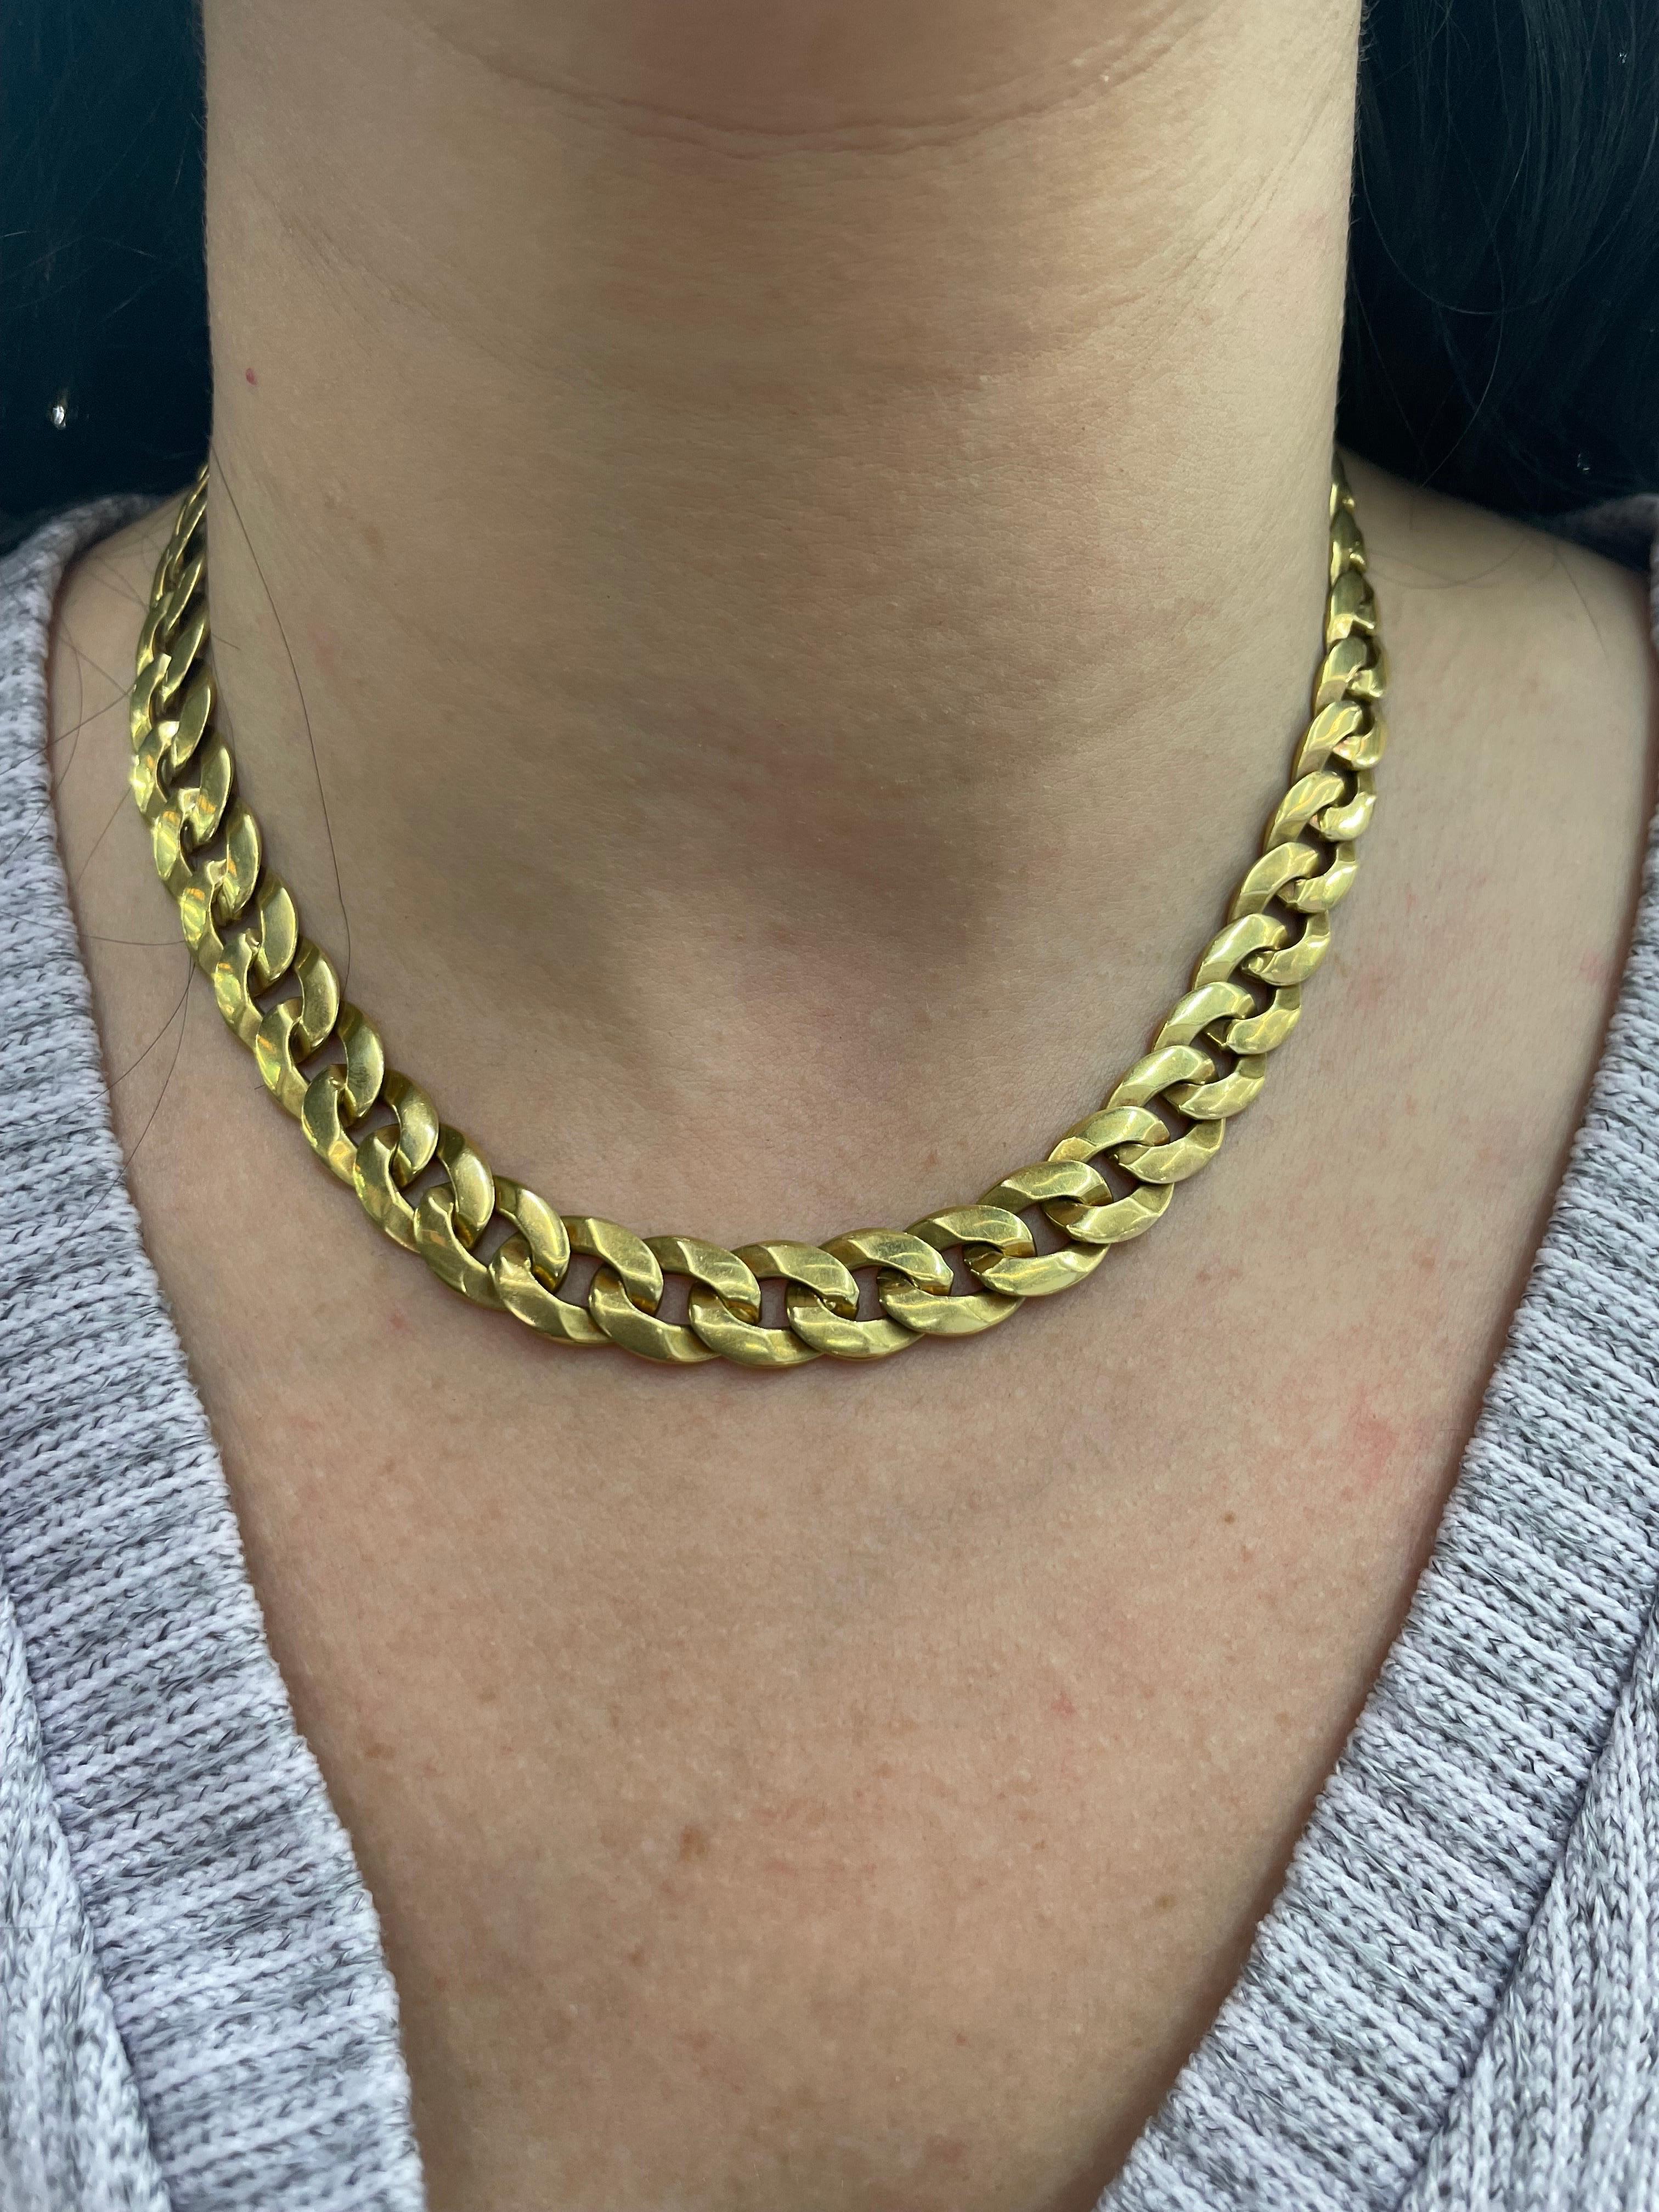 18 Karat Yellow Gold link necklace 49 Cuban links weighing 86.3 grams, 16.4 inches.
More link necklaces available.